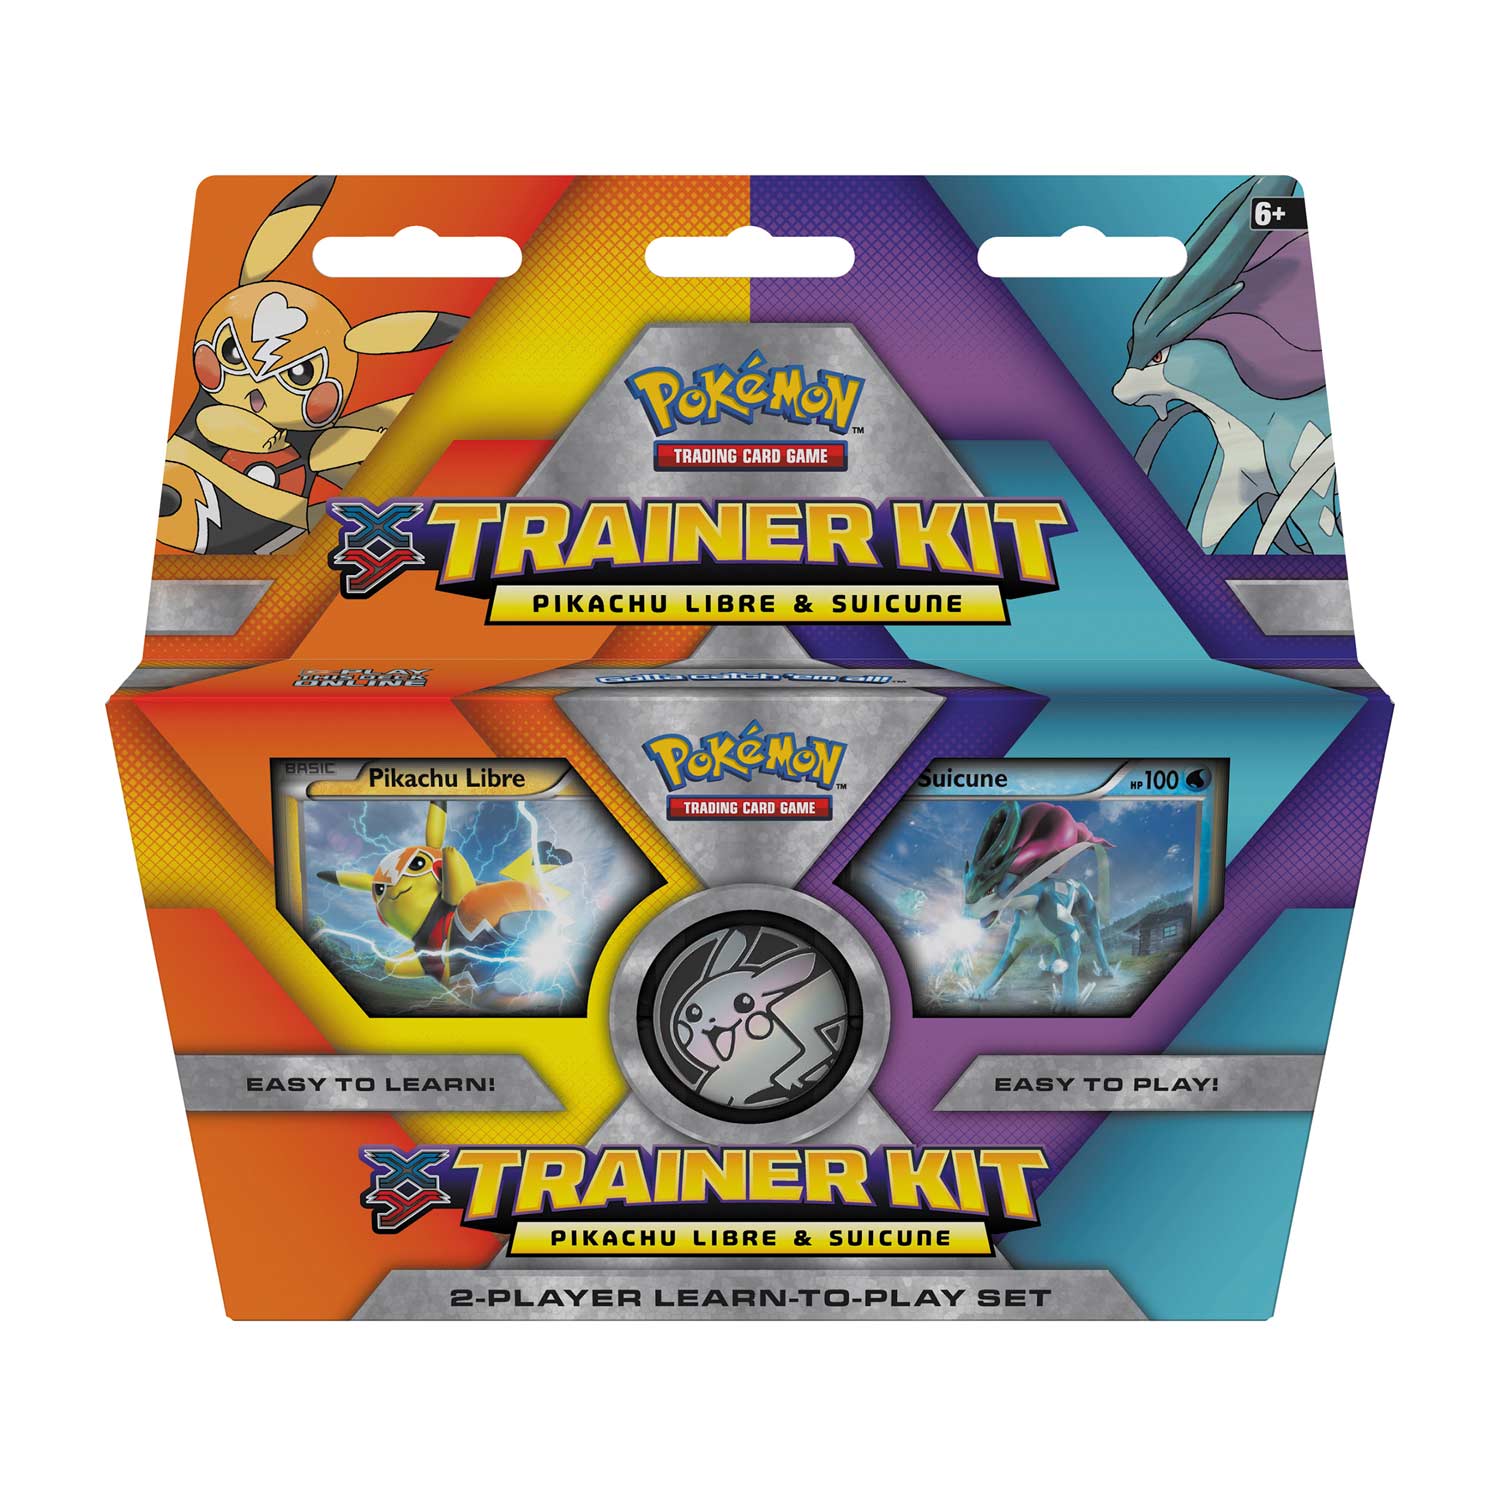 Pokémon Tcg Xy Trainer Kit Pikachu Libre And Suicune